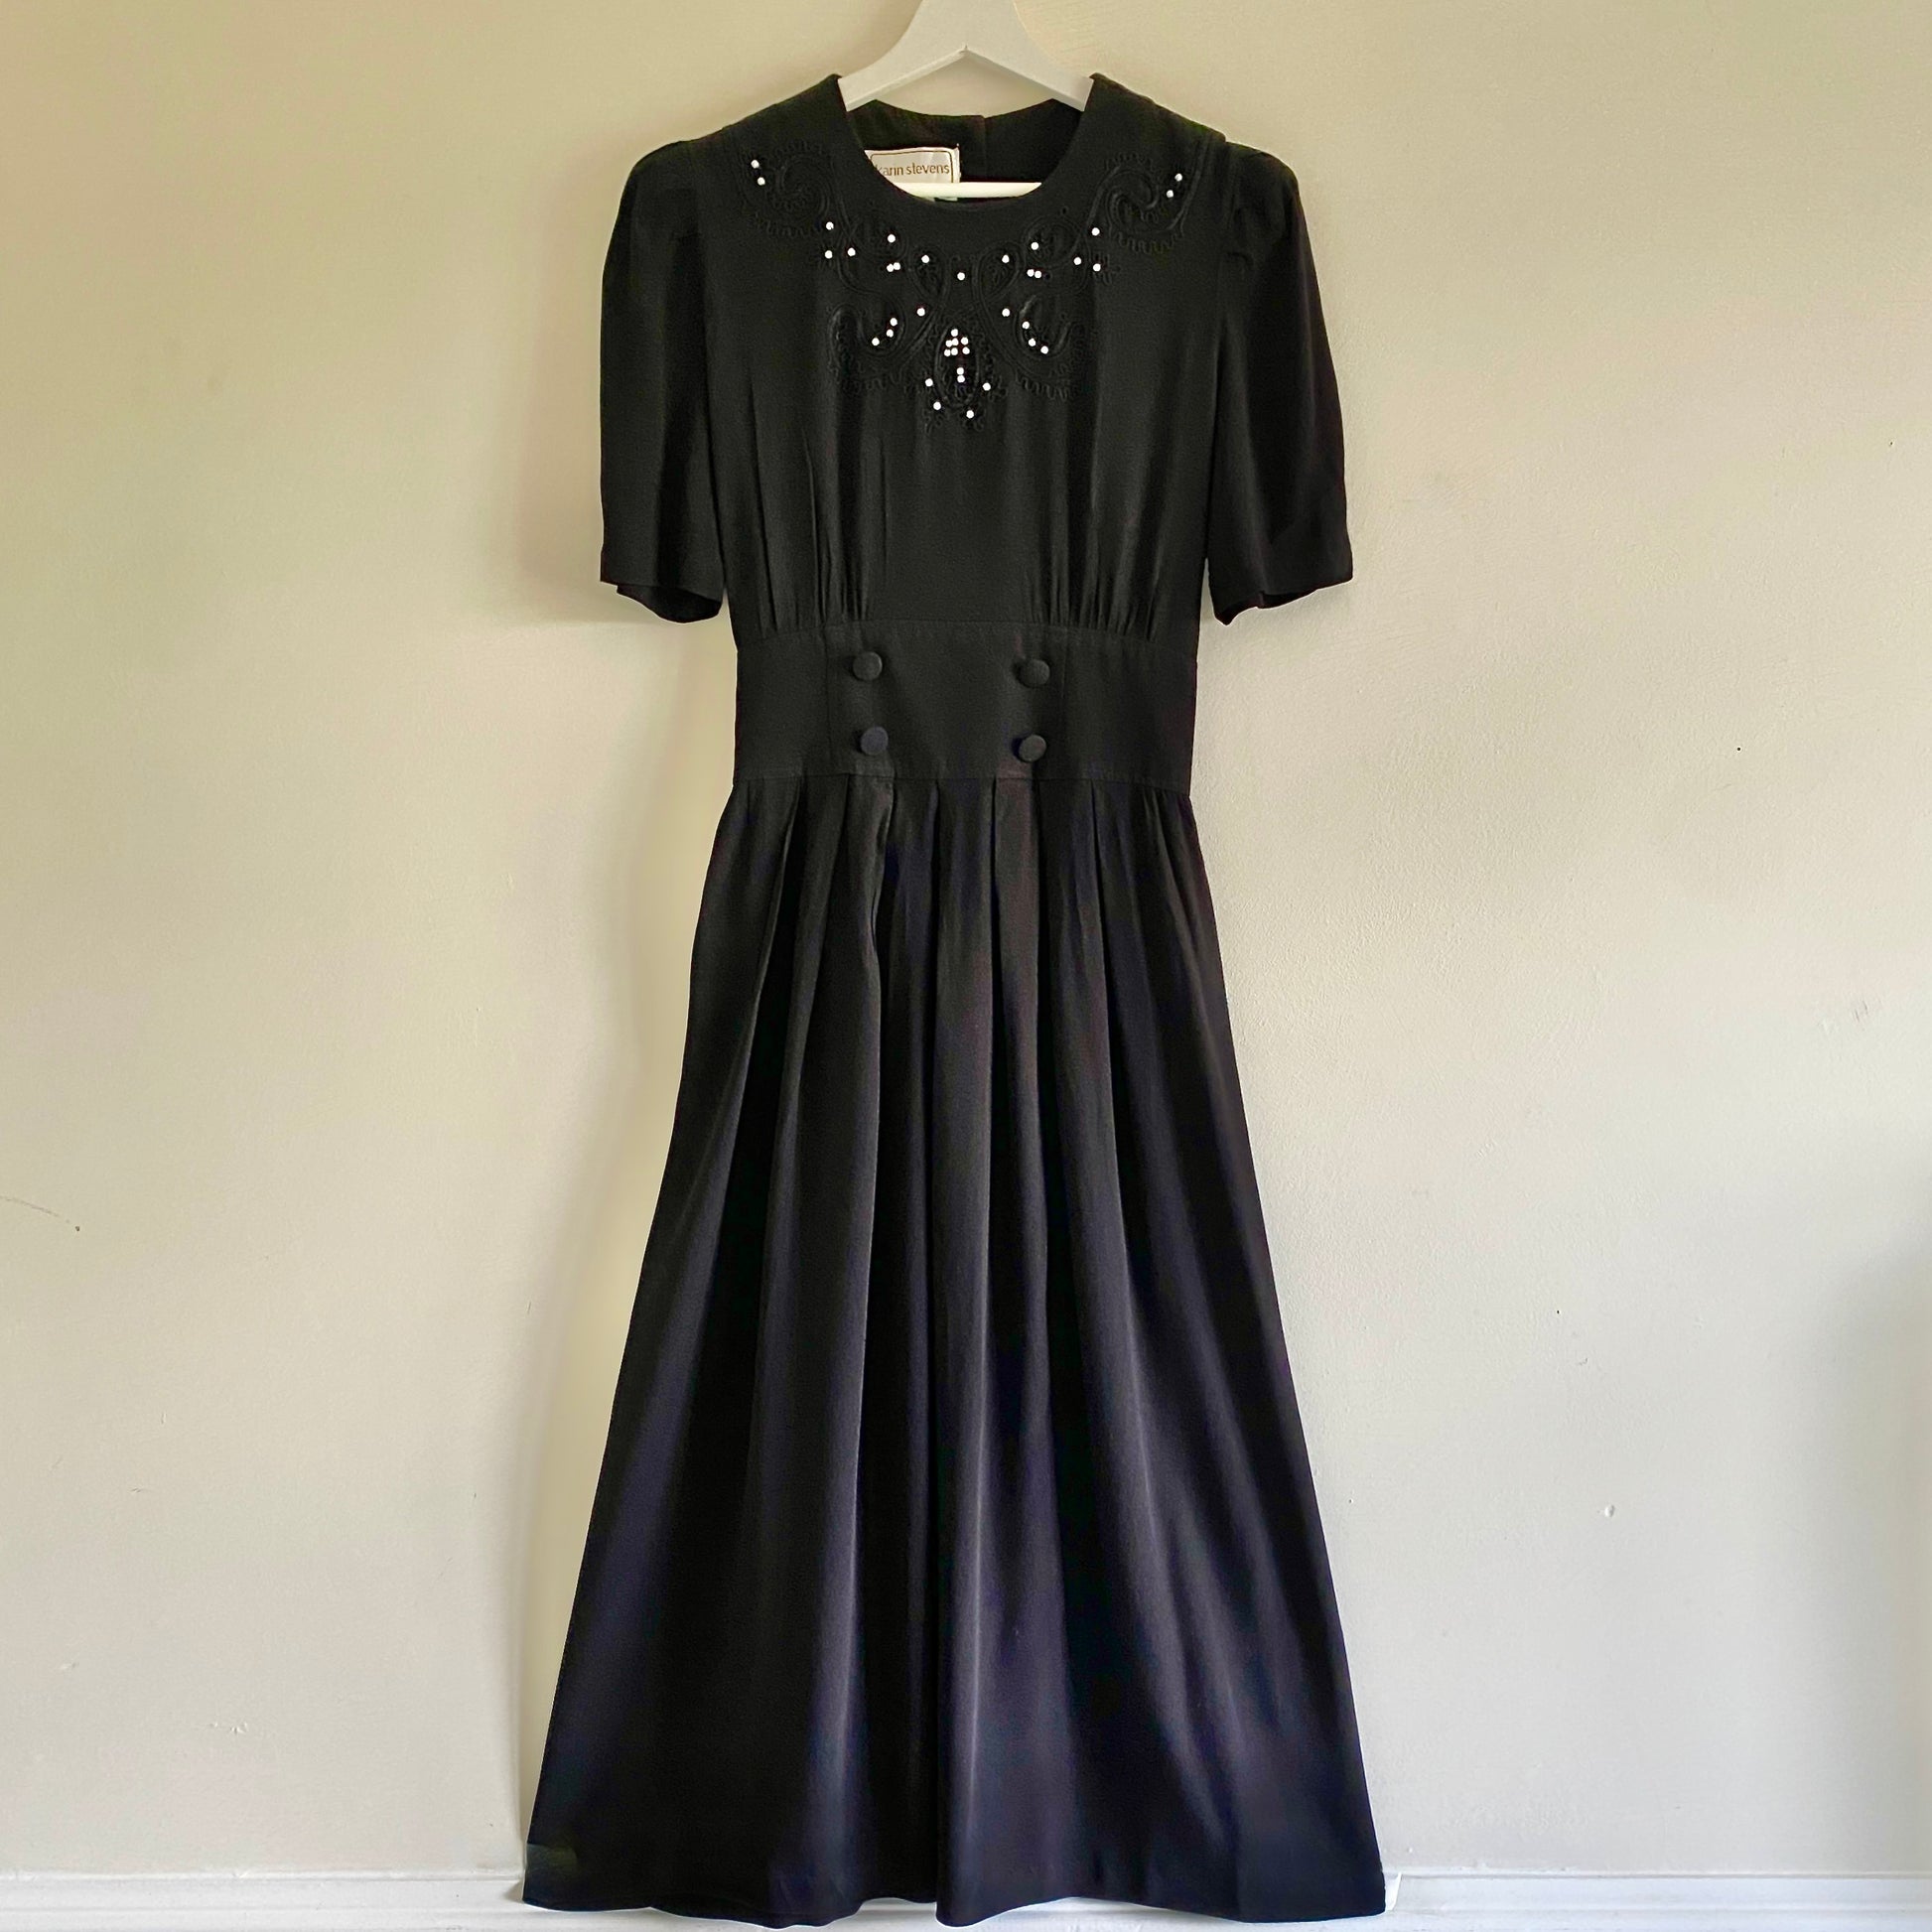 80s vintage black midi dress Decorative braiding and beads to front Short sleeves with gentle gathering to shoulders Button & zip fastening to back  Pleated skirt with elasticated back 4 decorative buttons to front waistband